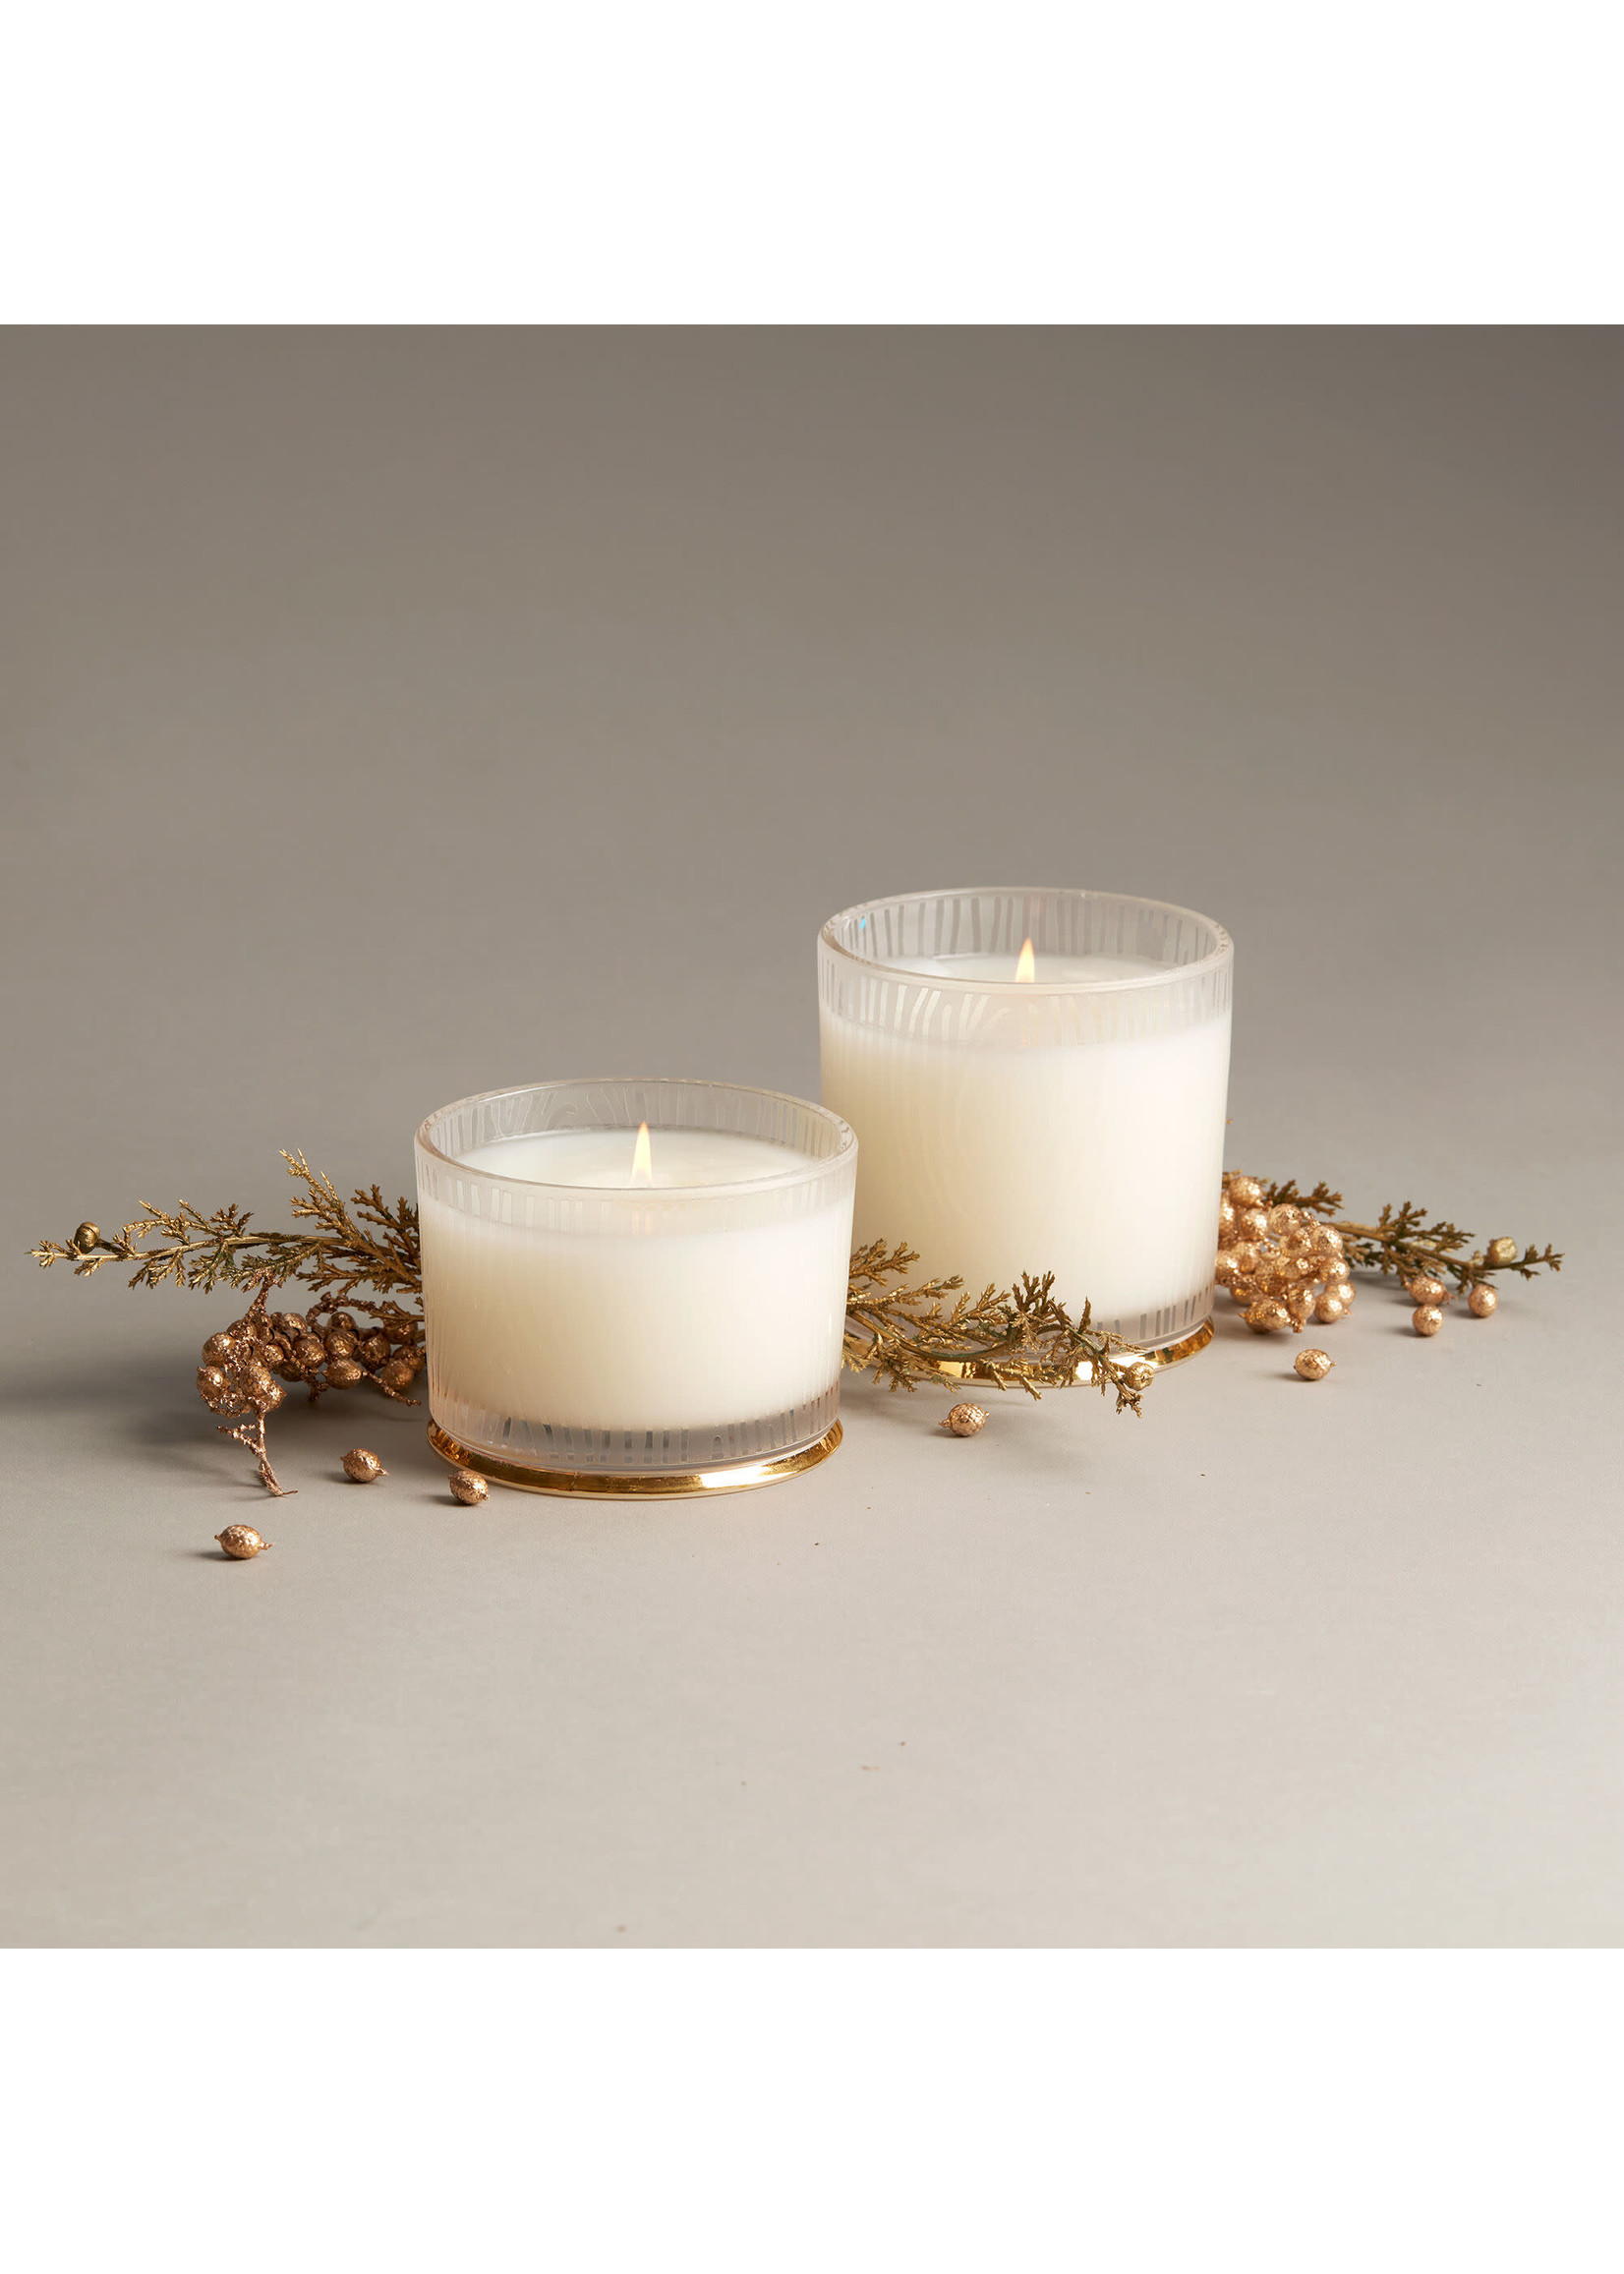 Thymes Frasier Fir - Frosted Wood Grain Candle Medium